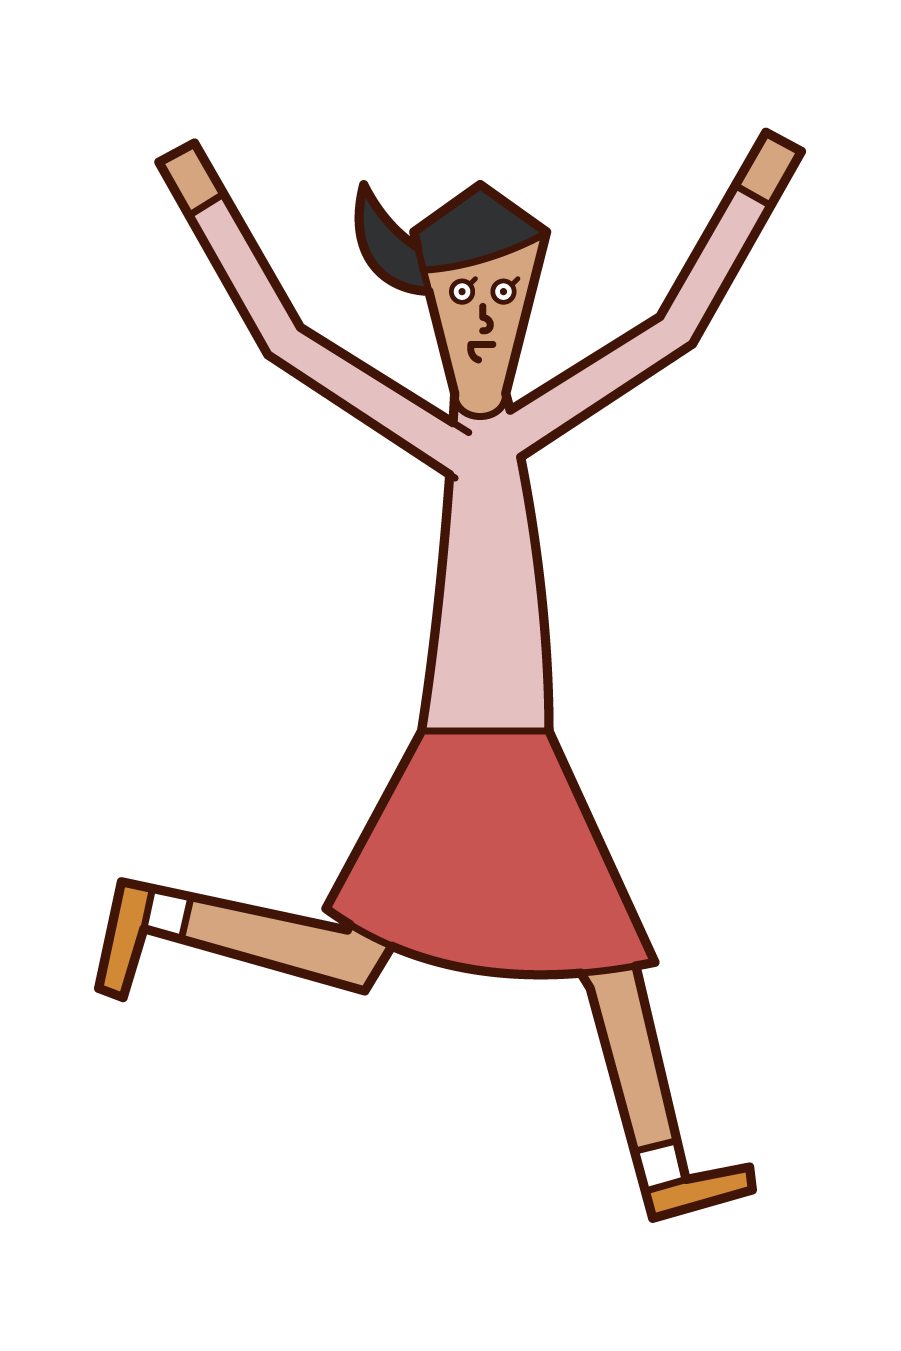 Illustration of a person (woman) running with open arms